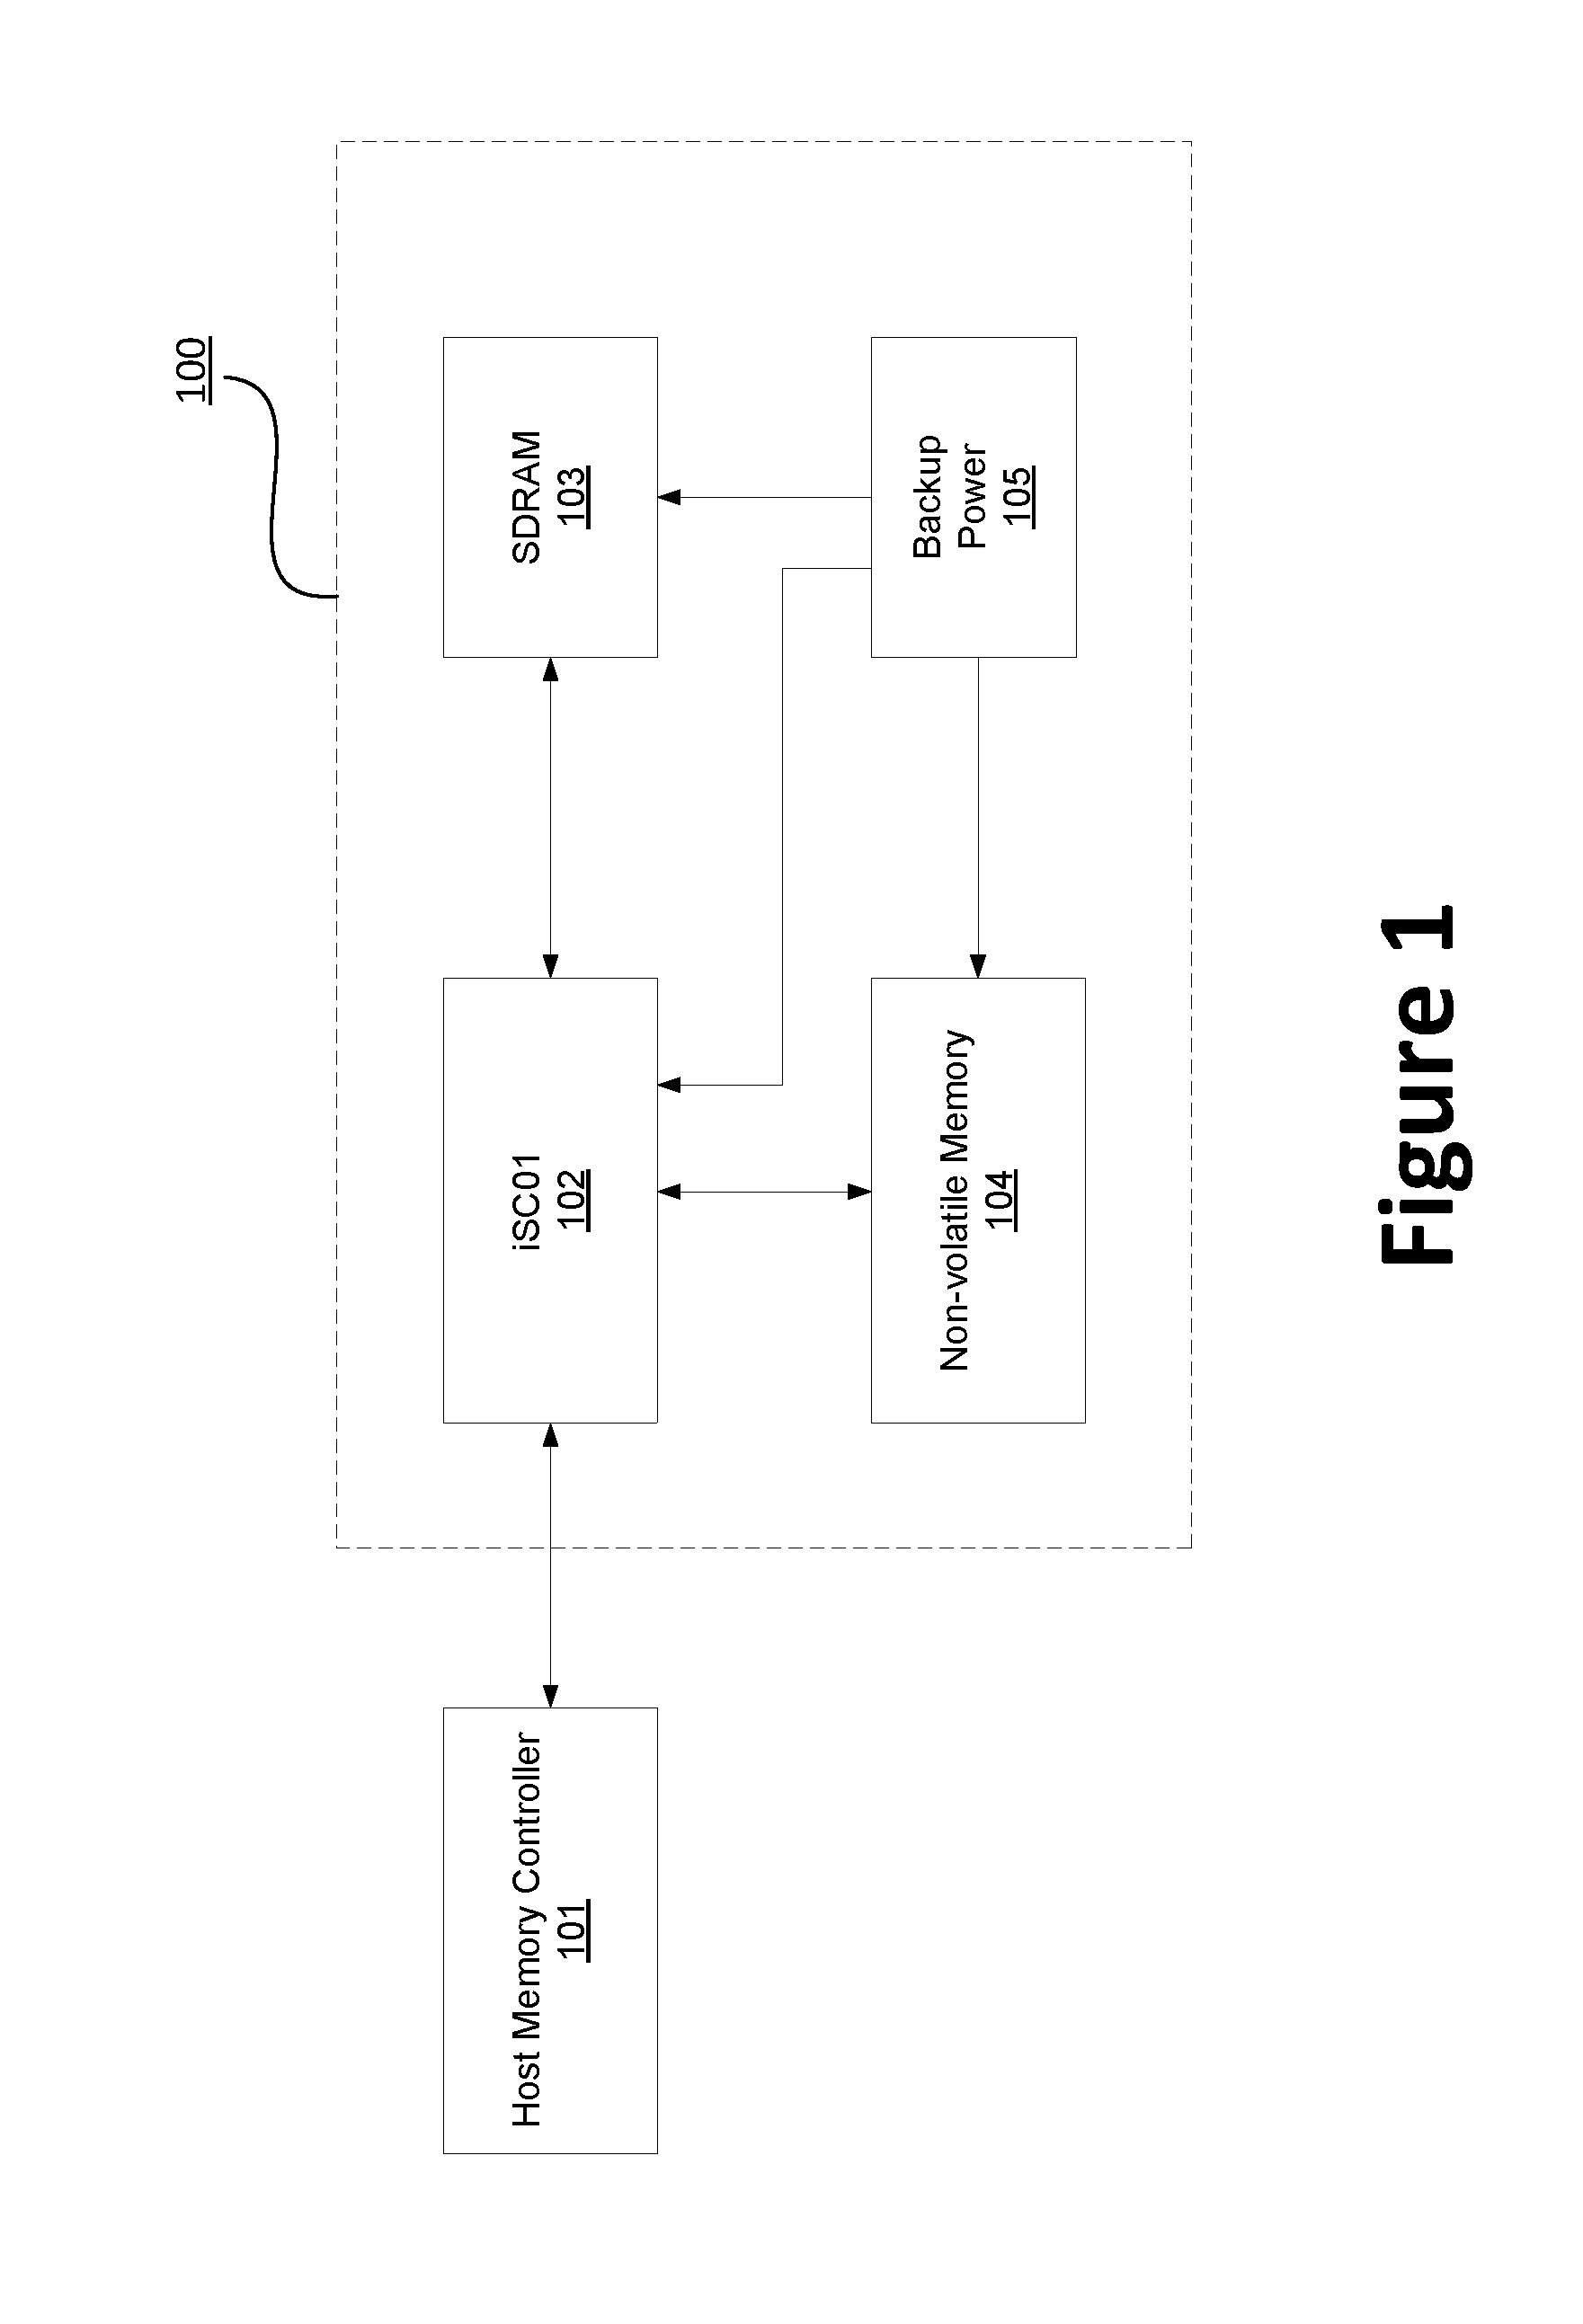 Memory controller system with non-volatile backup storage